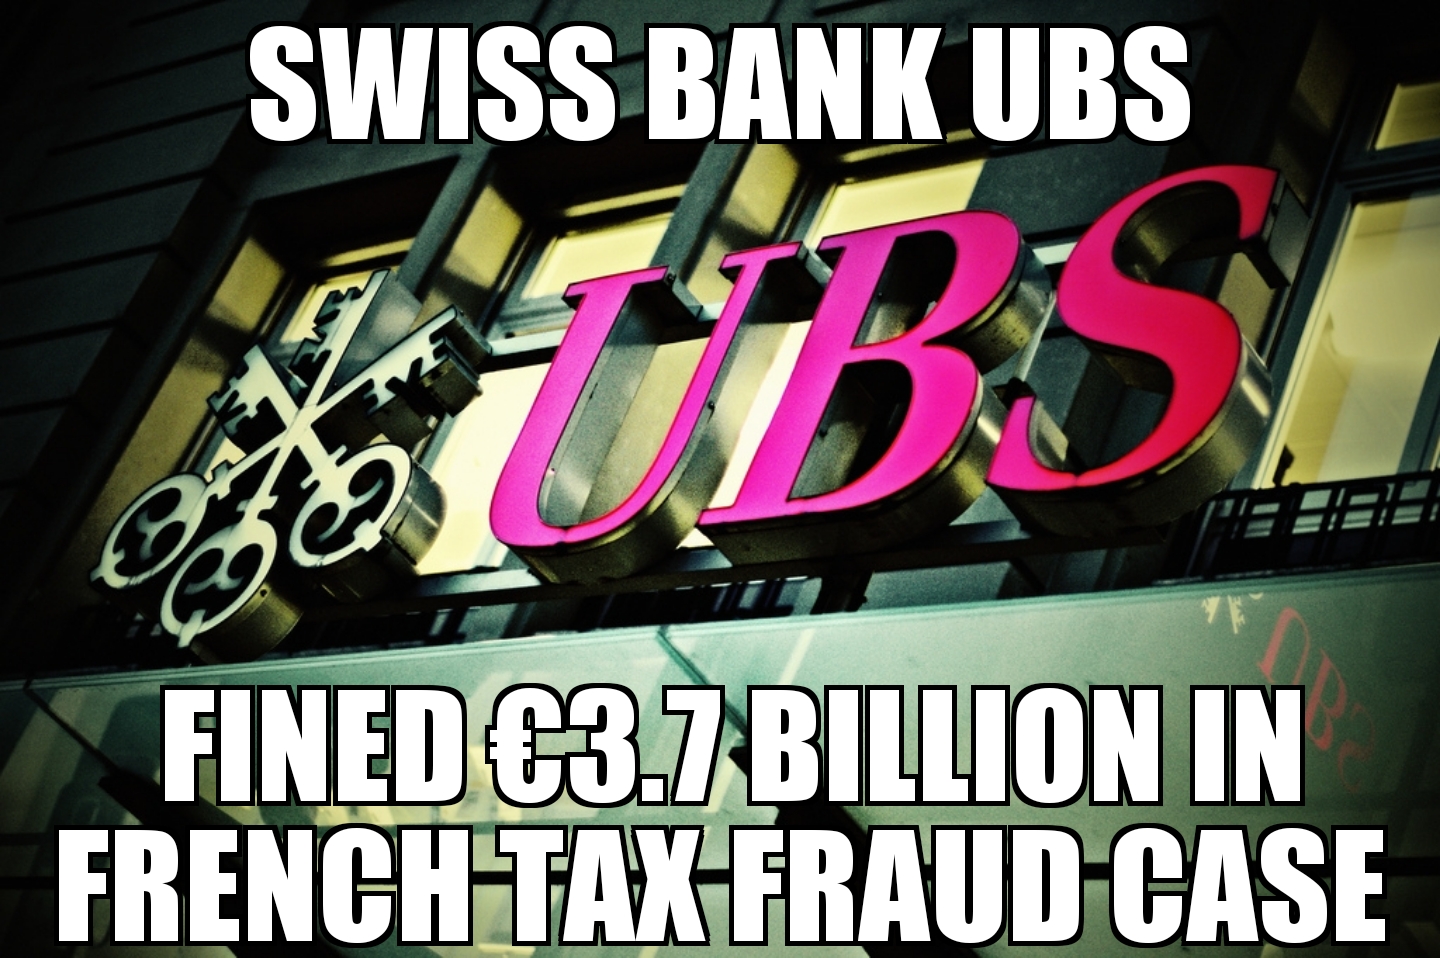 UBS fined €3.7 billion for tax fraud